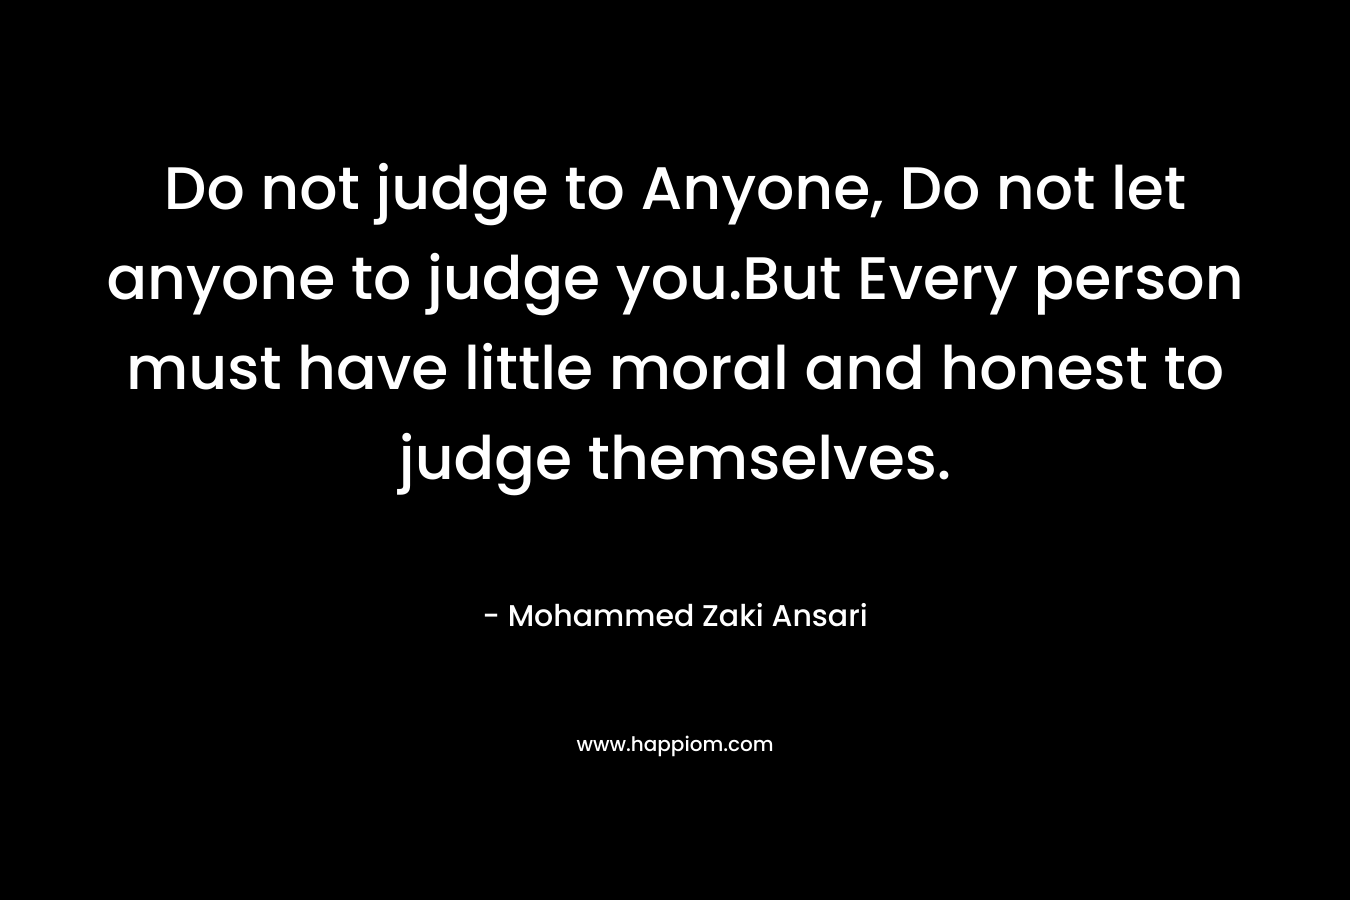 Do not judge to Anyone, Do not let anyone to judge you.But Every person must have little moral and honest to judge themselves. – Mohammed Zaki Ansari